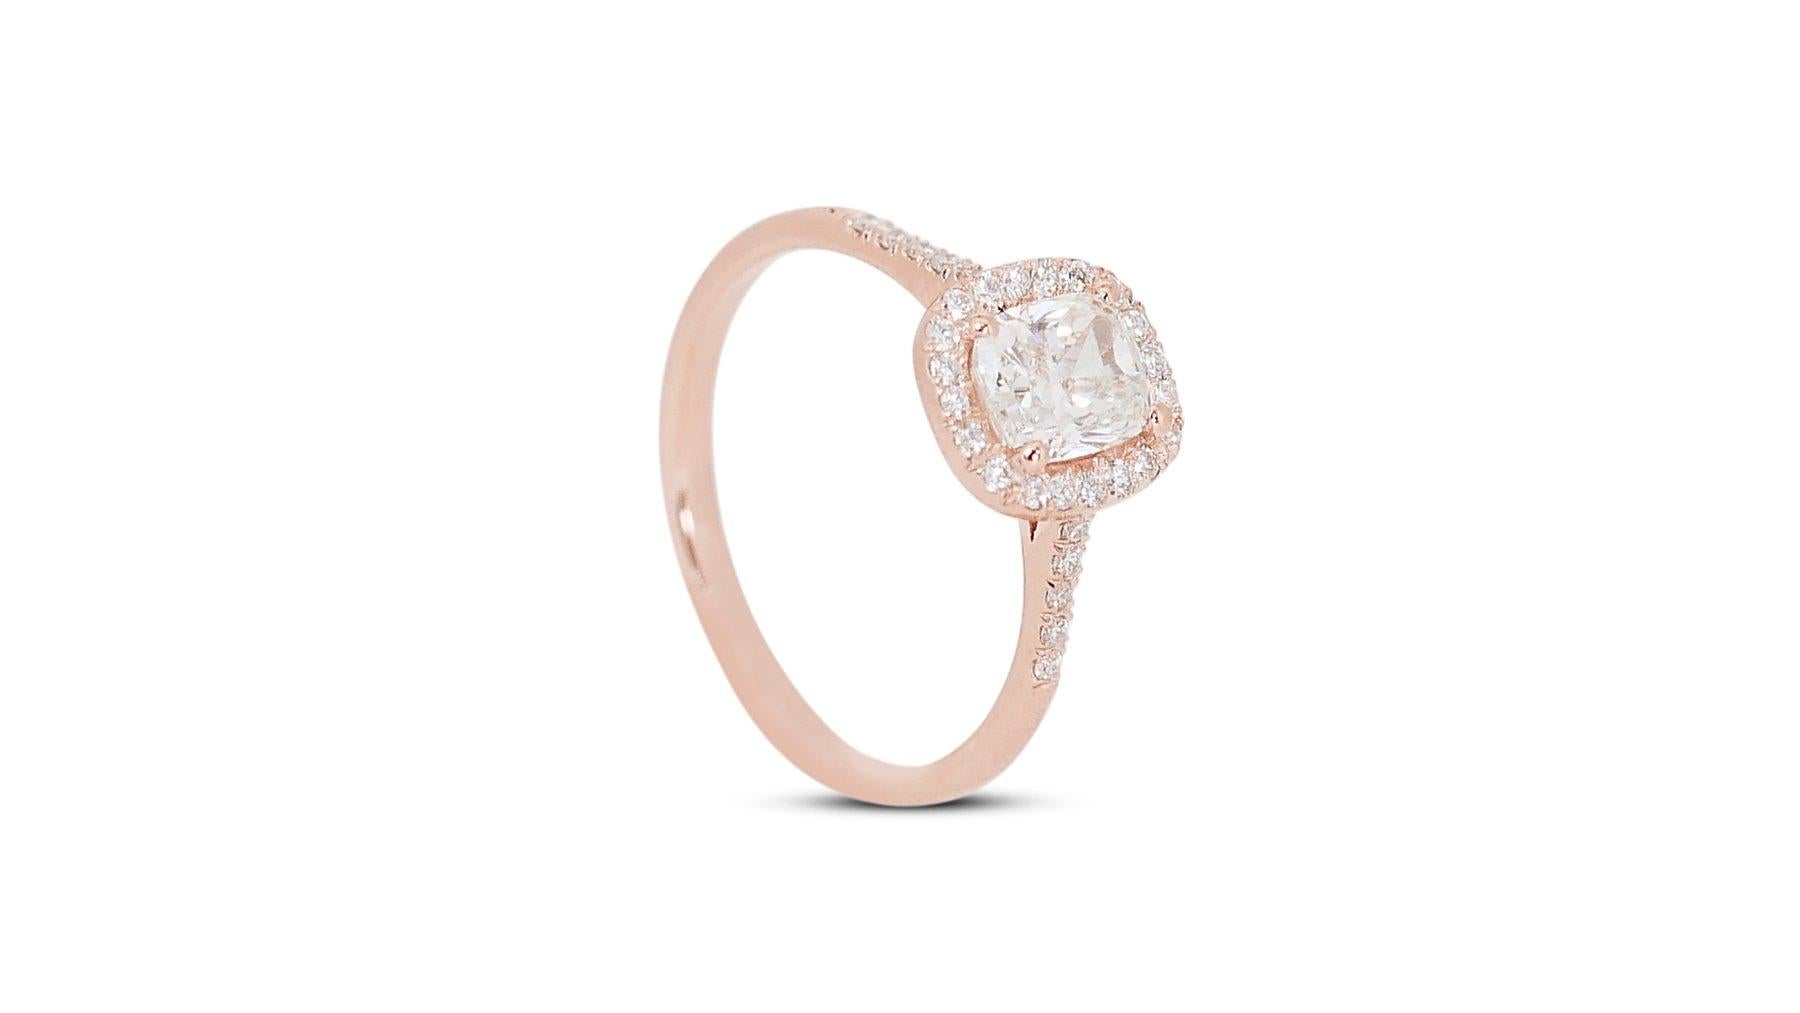 
Sparkling 18K Rose Gold Natural Diamond Halo Ring w/1.69 Carat

A captivating diamond halo ring featuring a 1.50 carat cushion shaped center stone. The center stone is further enhanced by a sparkling halo of 30 round brilliant cut diamonds totaling